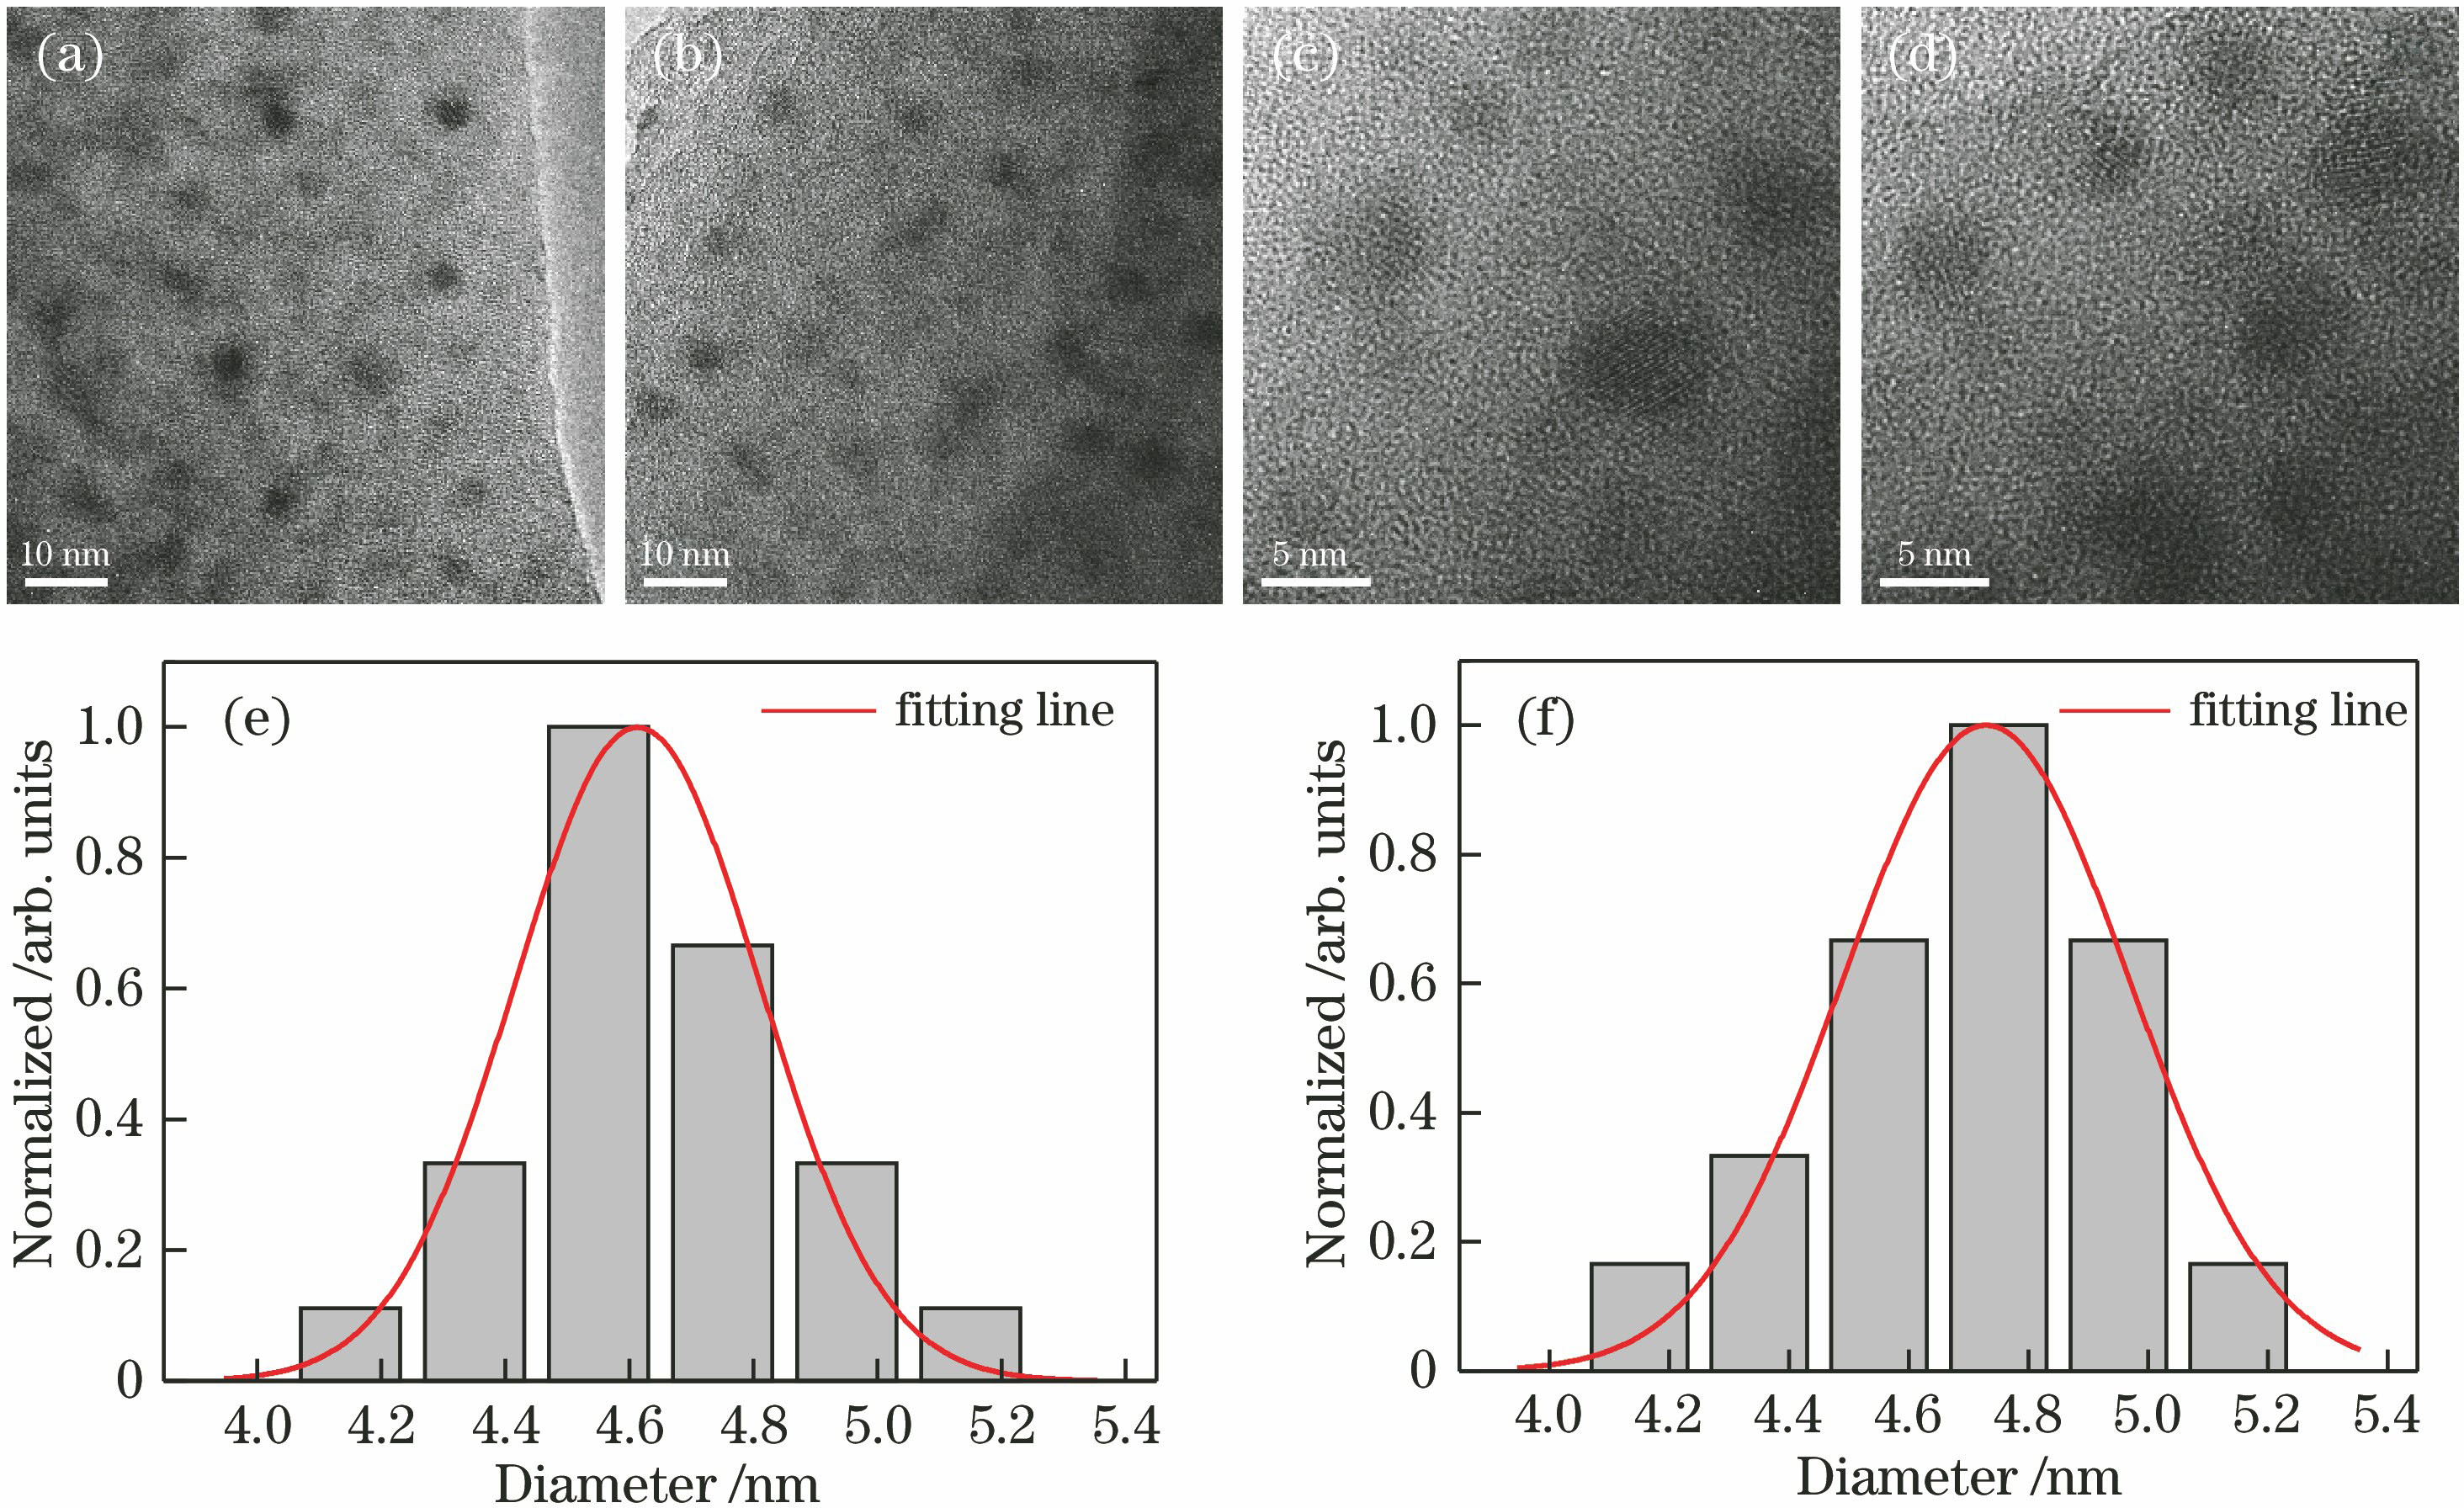 TEM images of PbSe QD-doped bulk glass and fiber fabricated under identical heat-treatment conditions and their normalized particle-size distributions. (a) TEM image of bulk glass; (b) TEM image of fiber; (c) high-resolution TEM image of bulk glass; (d) high-resolution TEM image of fiber; (e) normalized particle-size distribution of PbSe QDs in bulk glass; (f) normalized particle-size distribution of PbSe QDs in fiber